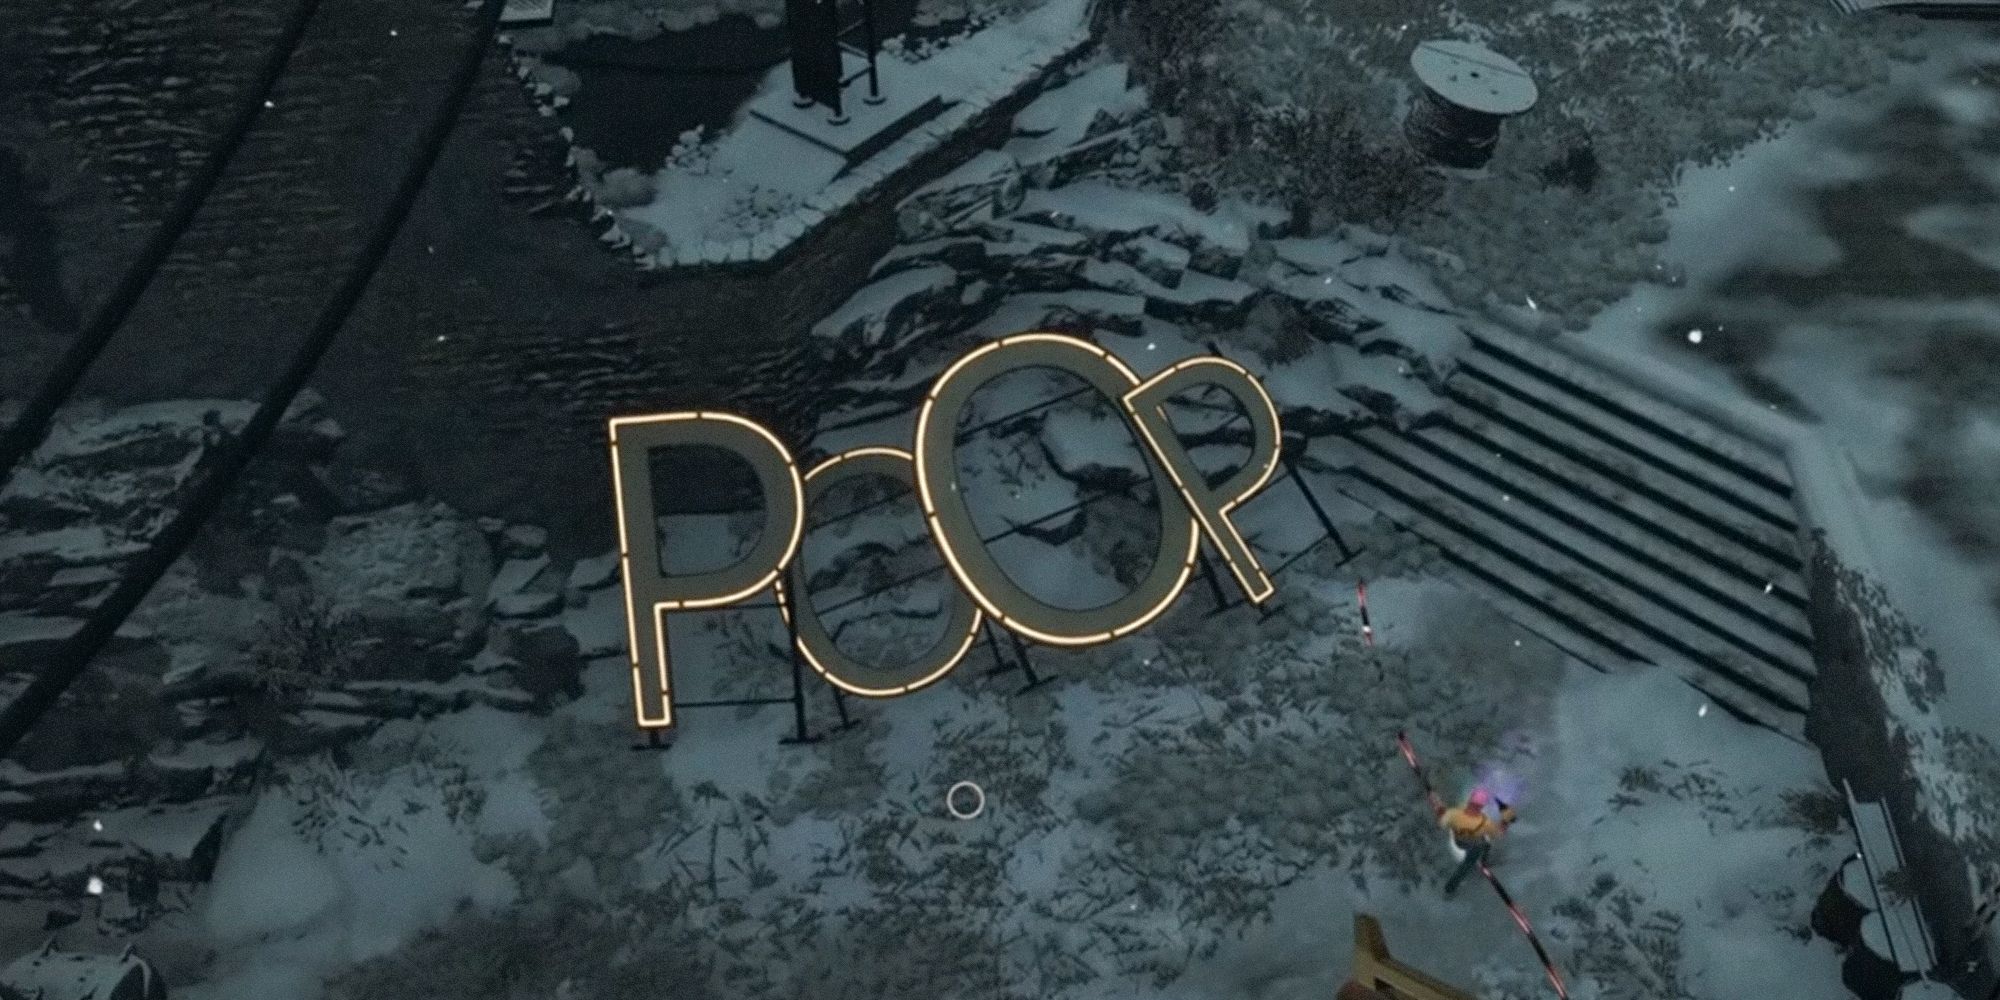 A neon sign placed upon snowy ground. It reads "Poop". A possible Easter egg in Deathloop.